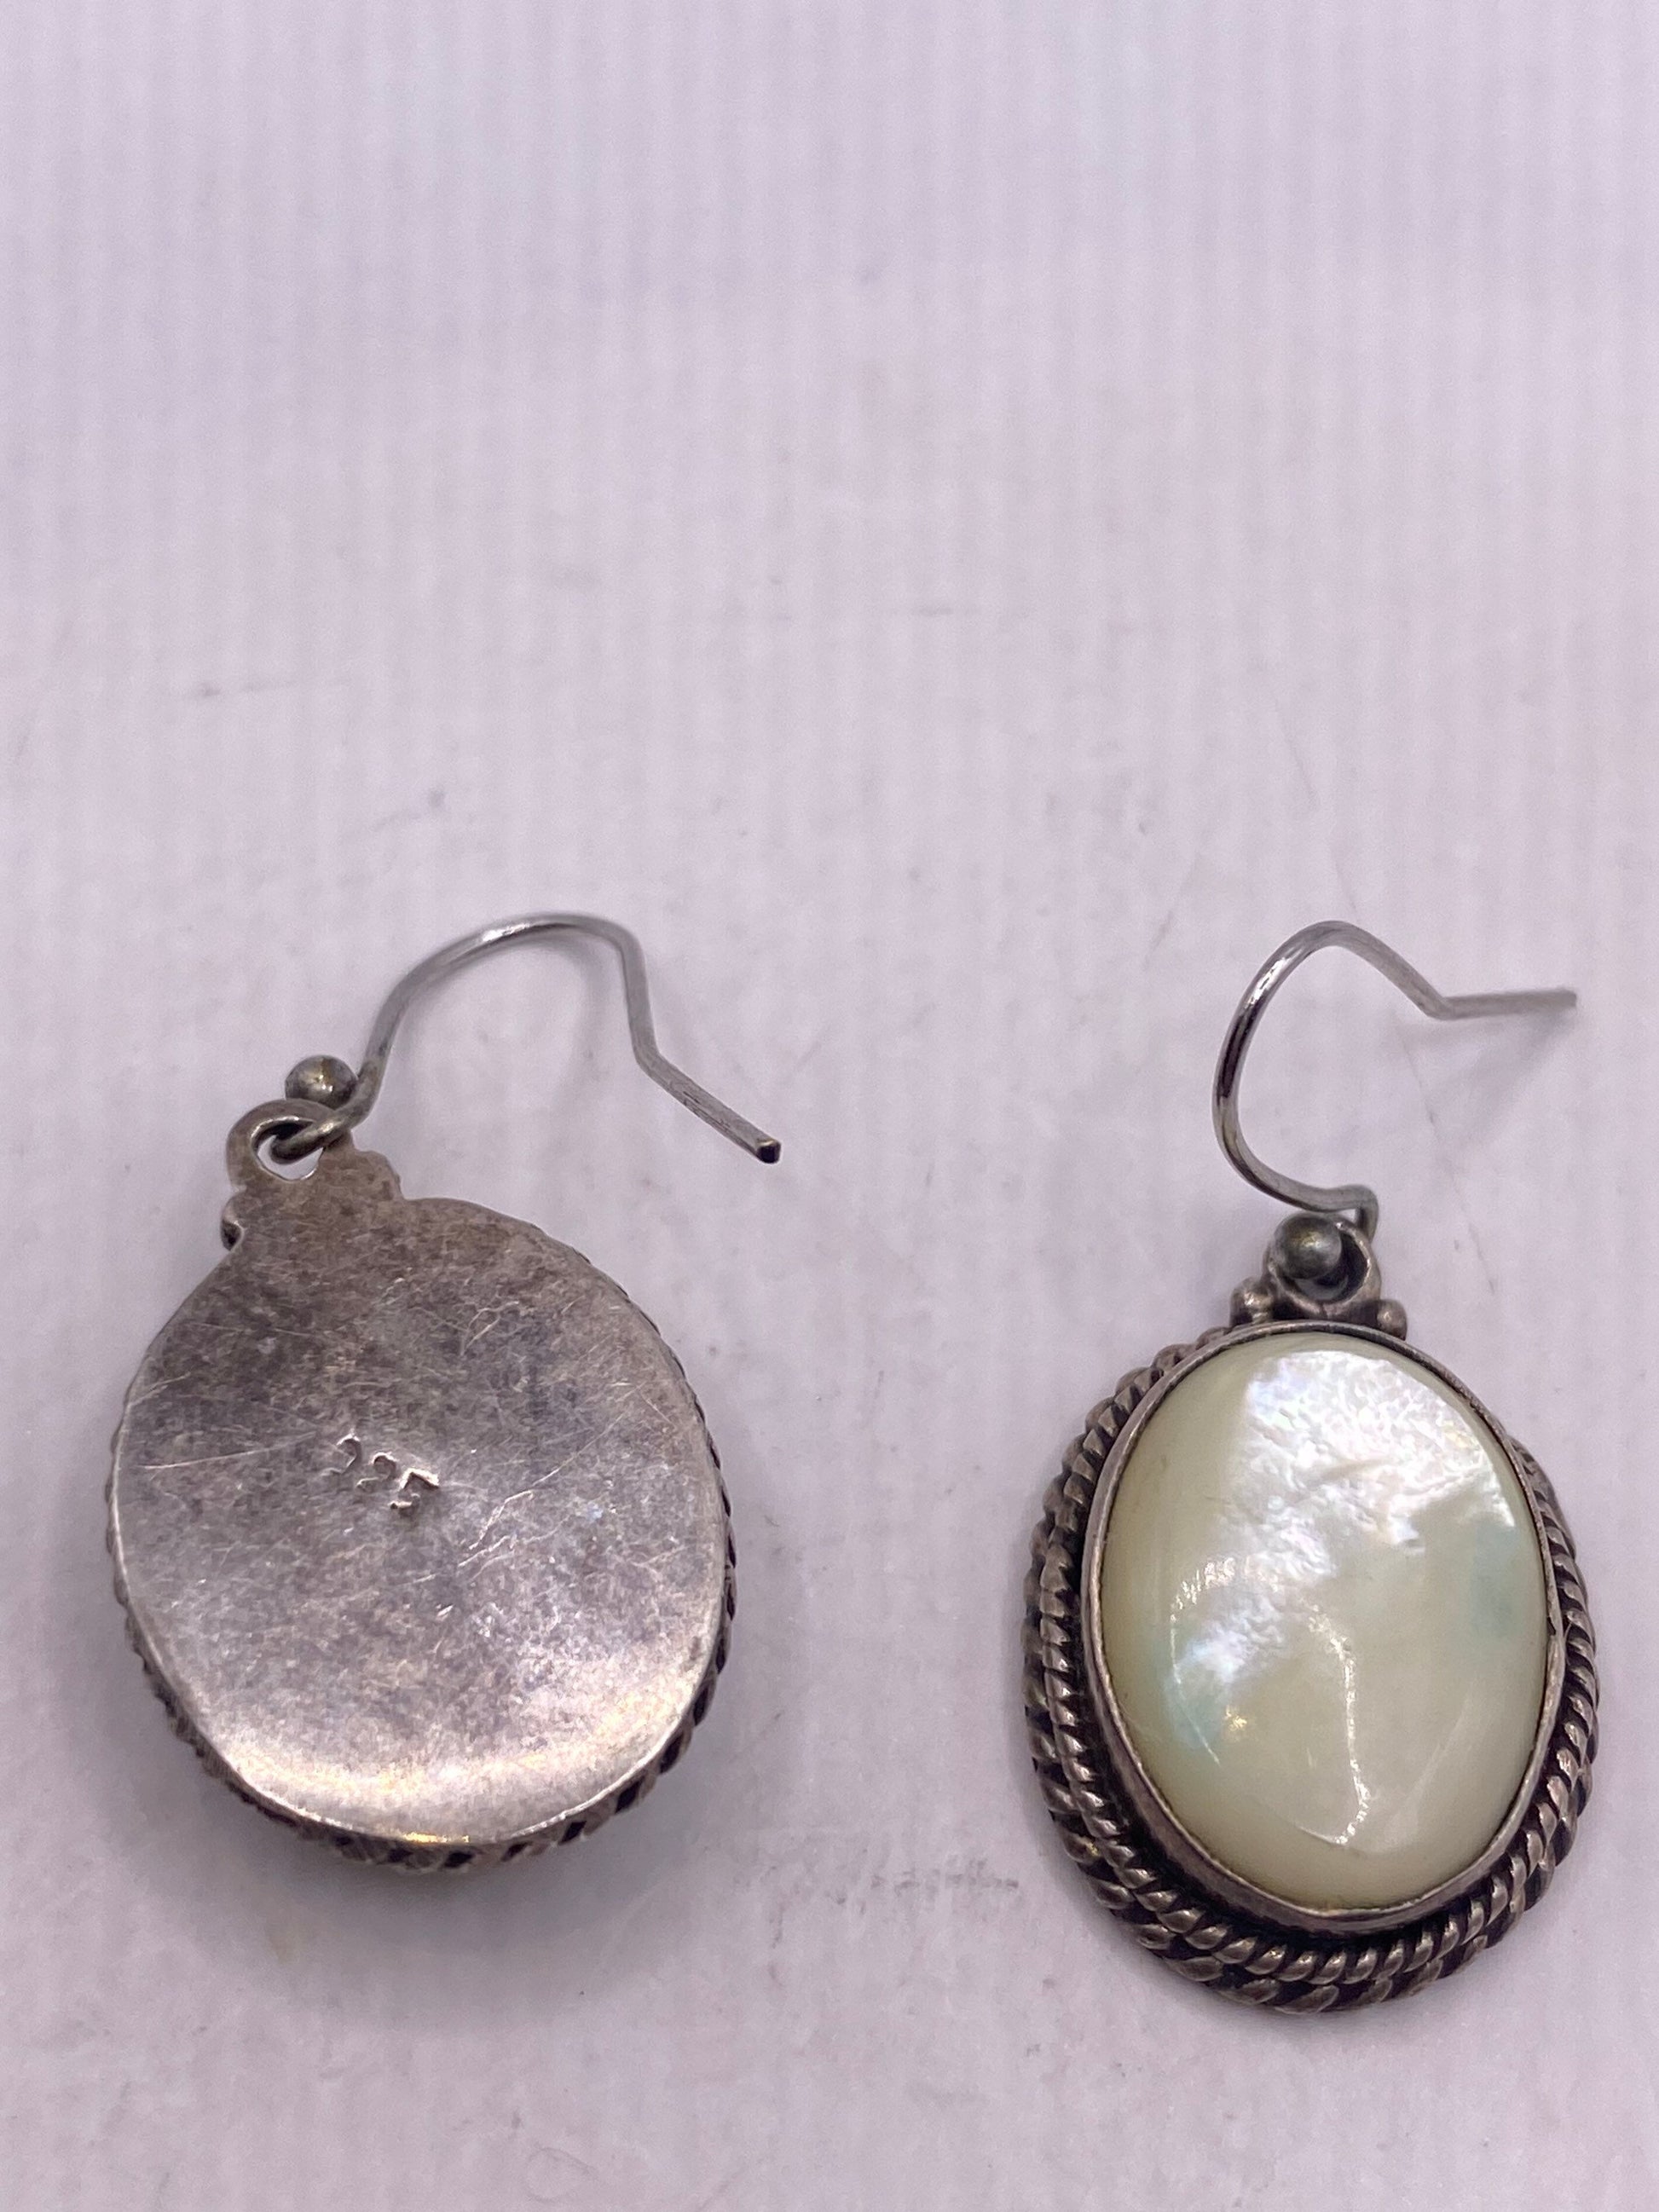 Antique Vintage Mother of Pearl 925 Sterling Silver Dangle Earrings